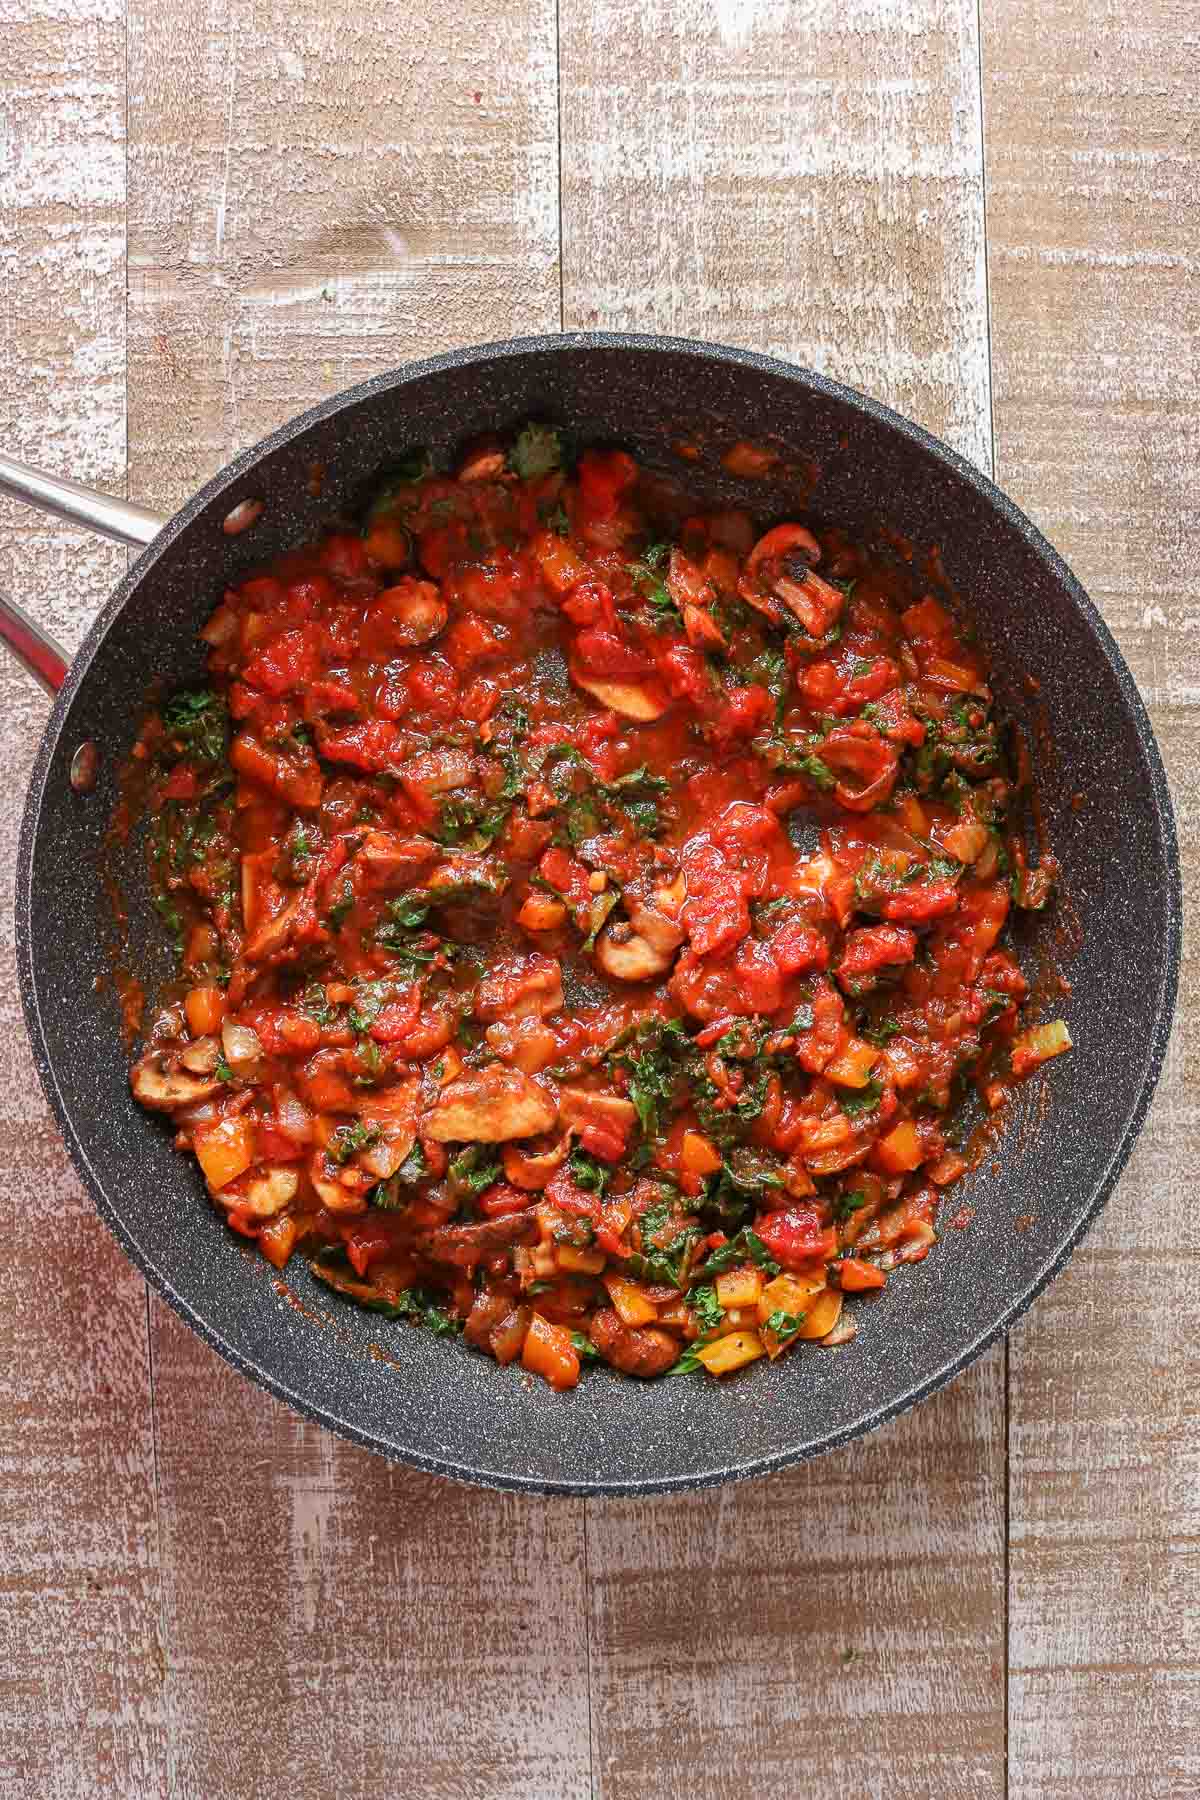 Vegetables and pasta sauce in a pan.